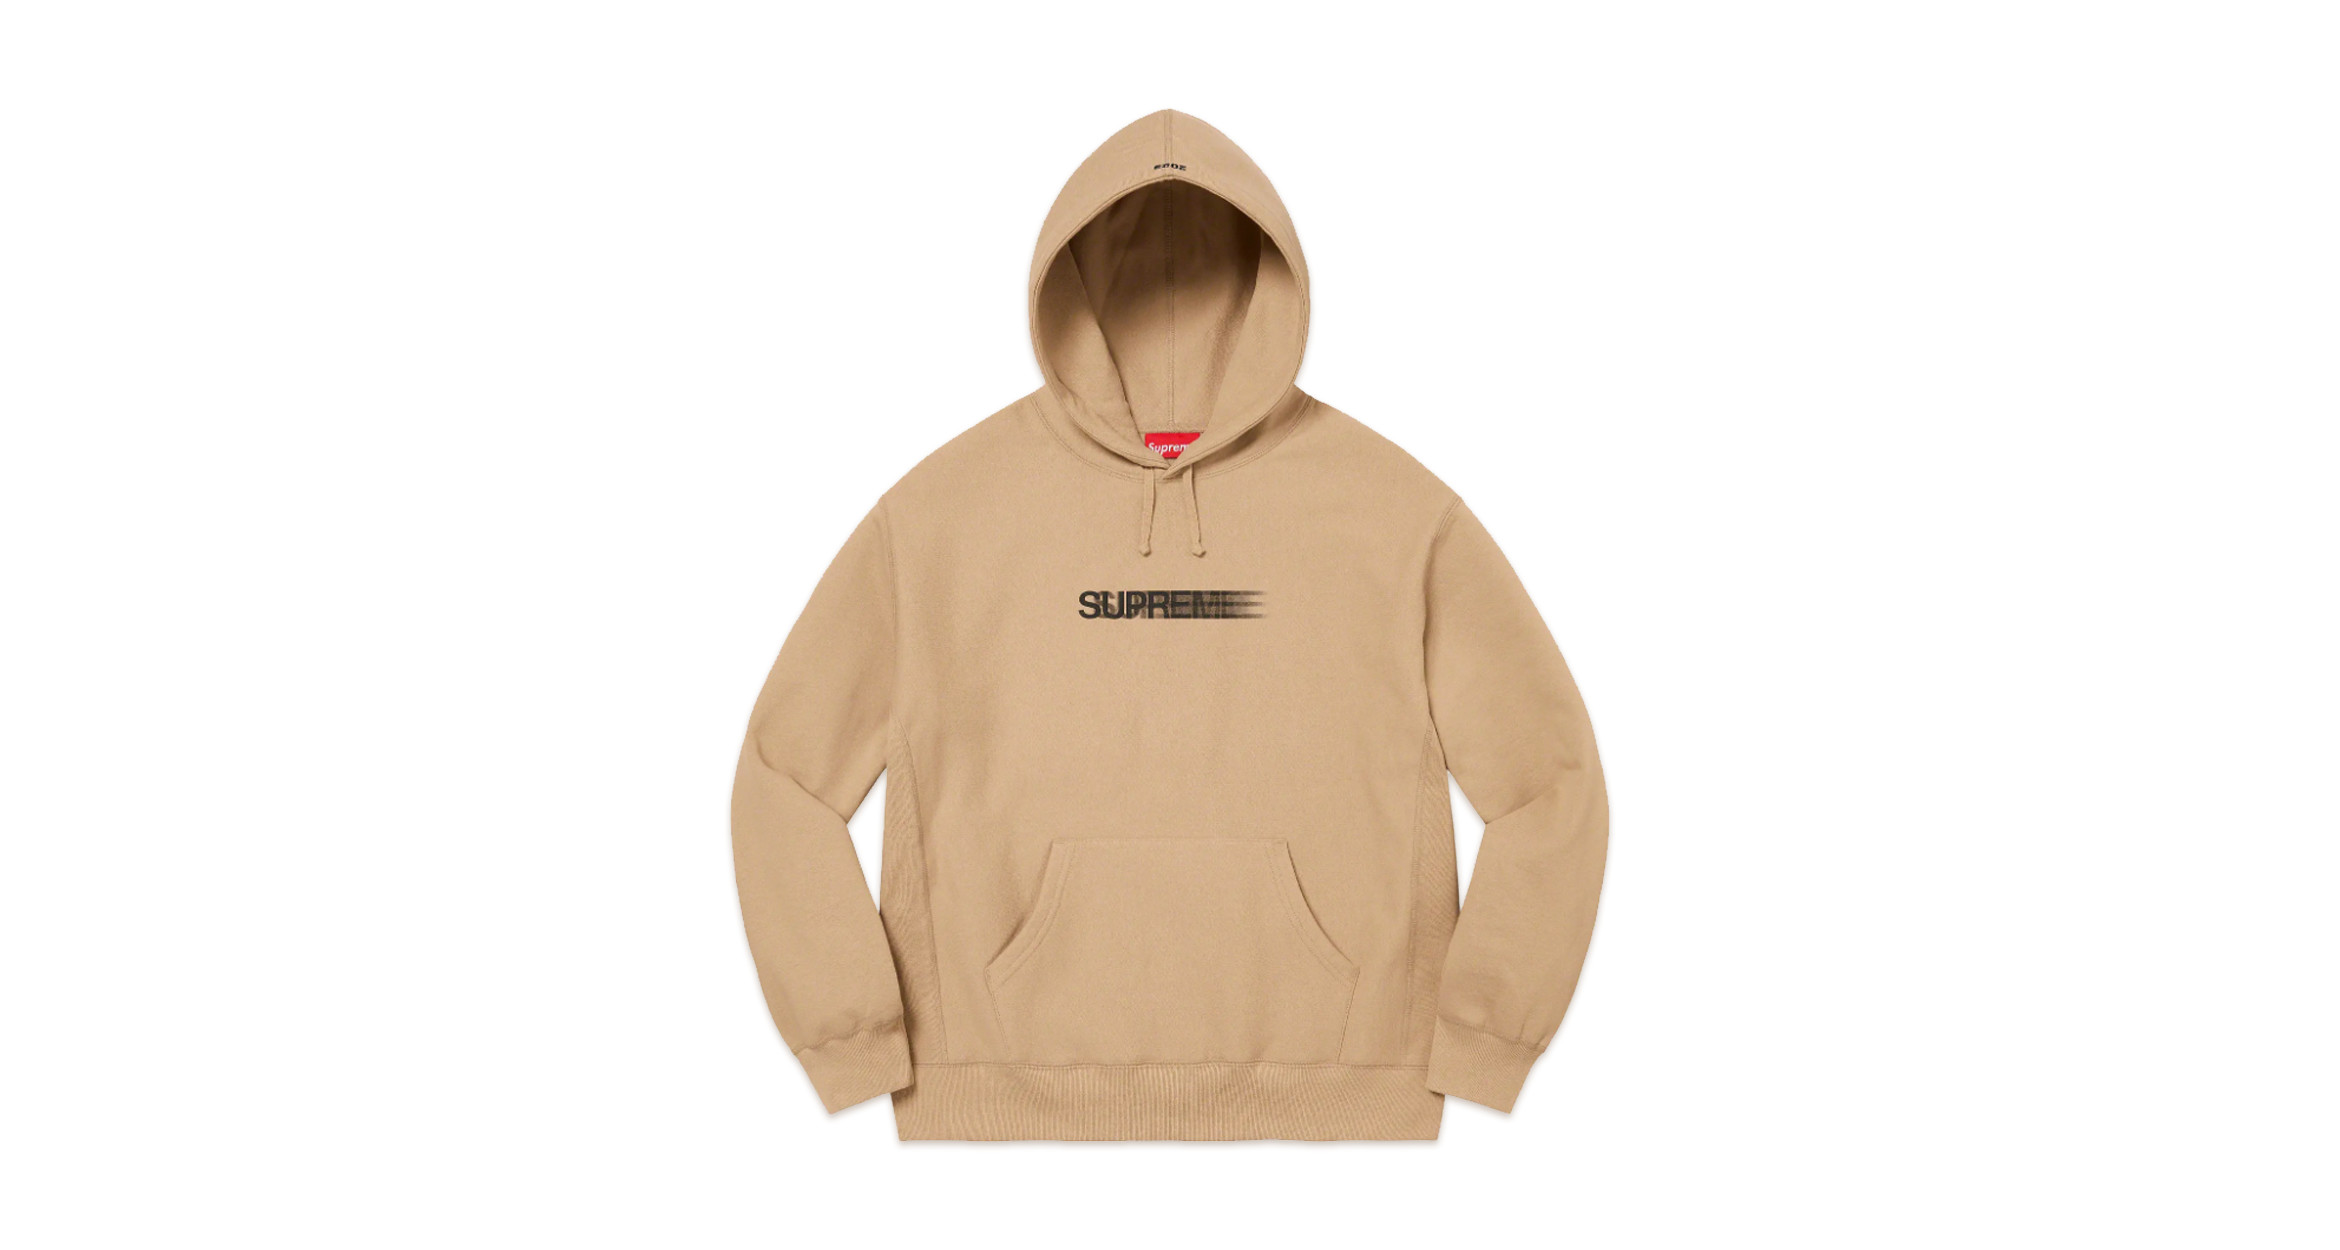 Motion Logo Hoodies & Nike Collab for This Week's Supreme SS23